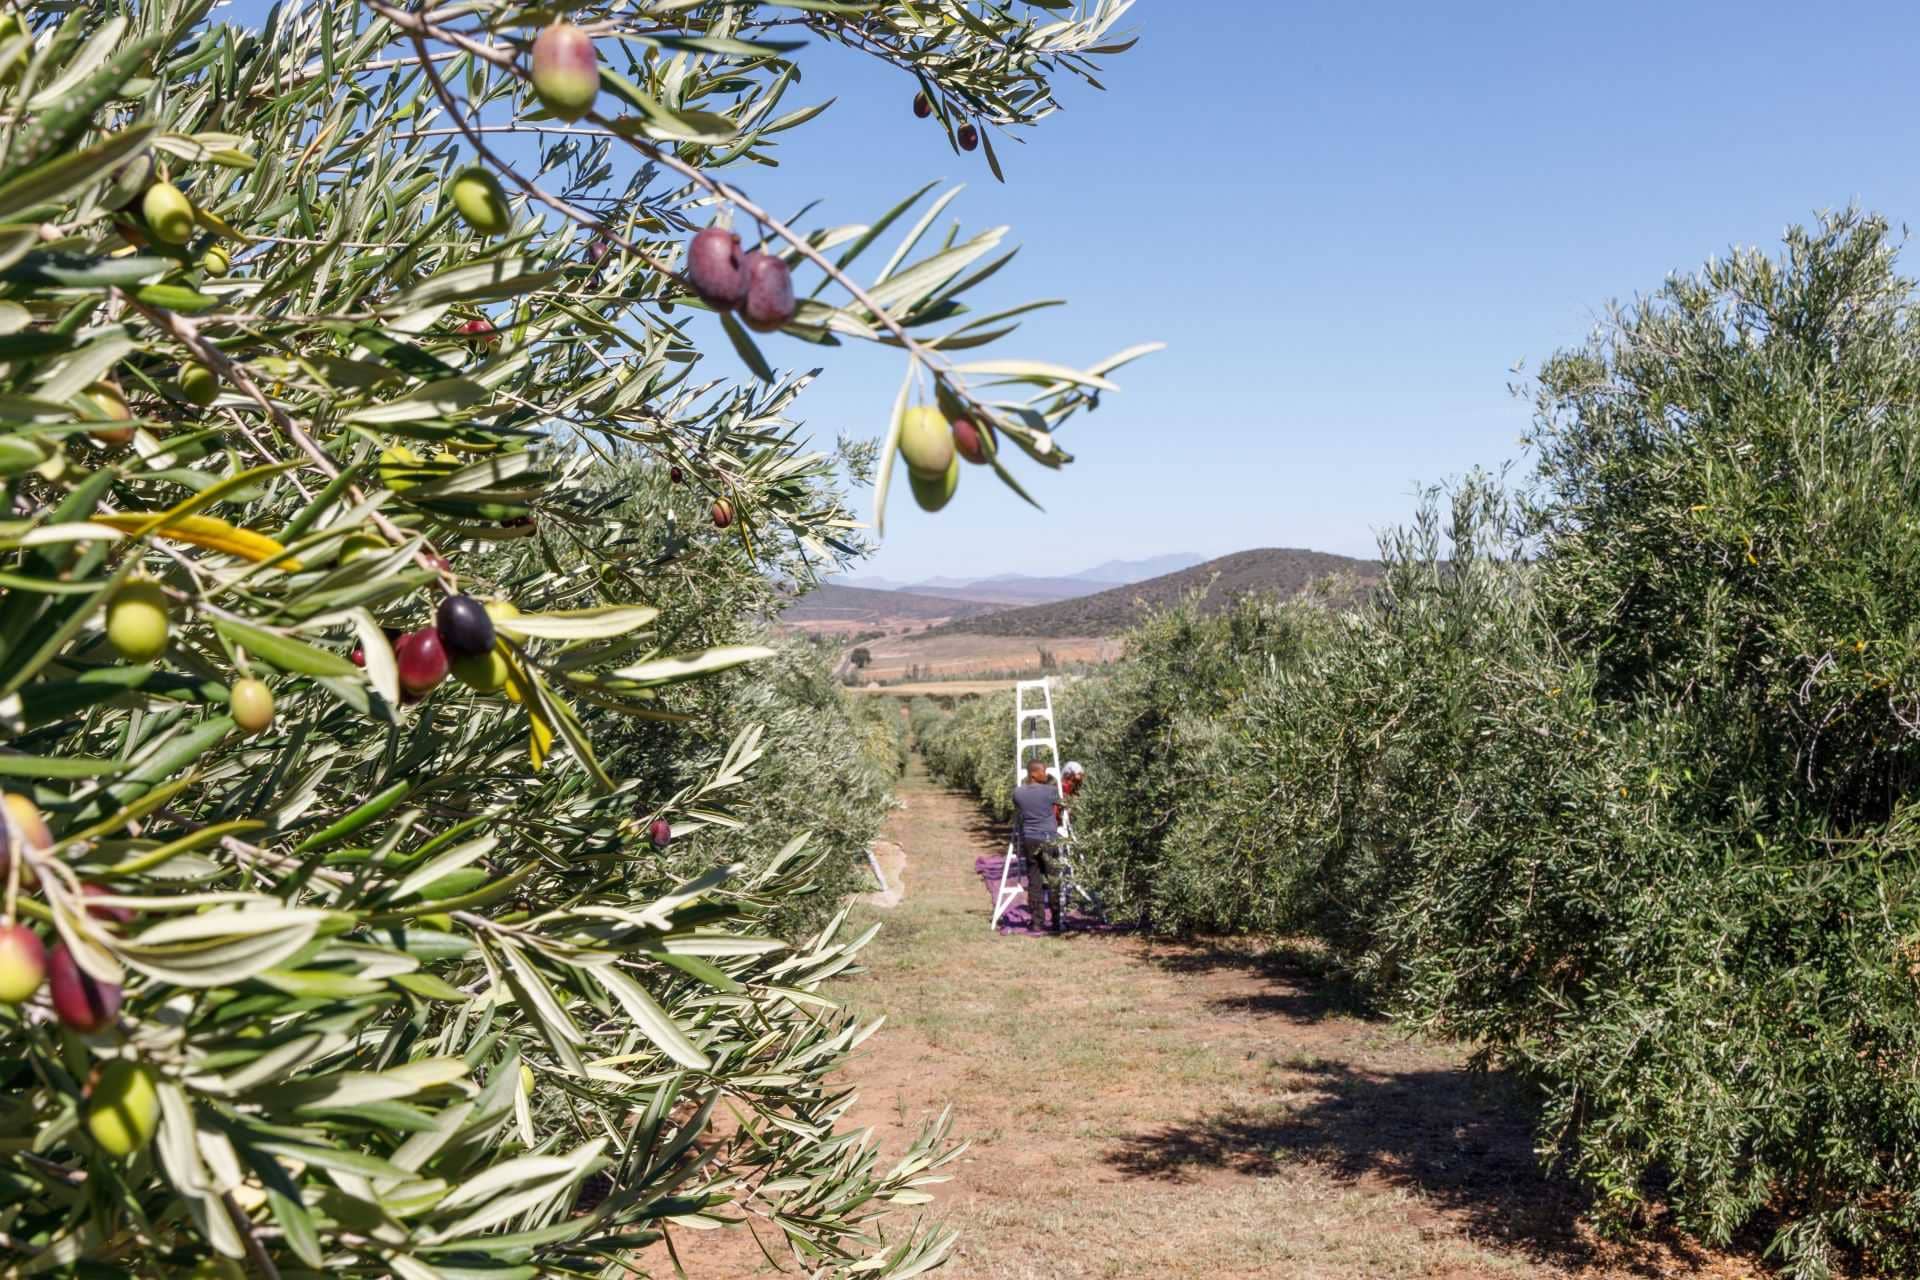 africa-middle-east-competitions-the-best-olive-oils-bountiful-harvest-yields-wins-for-south-african-producers-at-world-competition-olive-oil-times